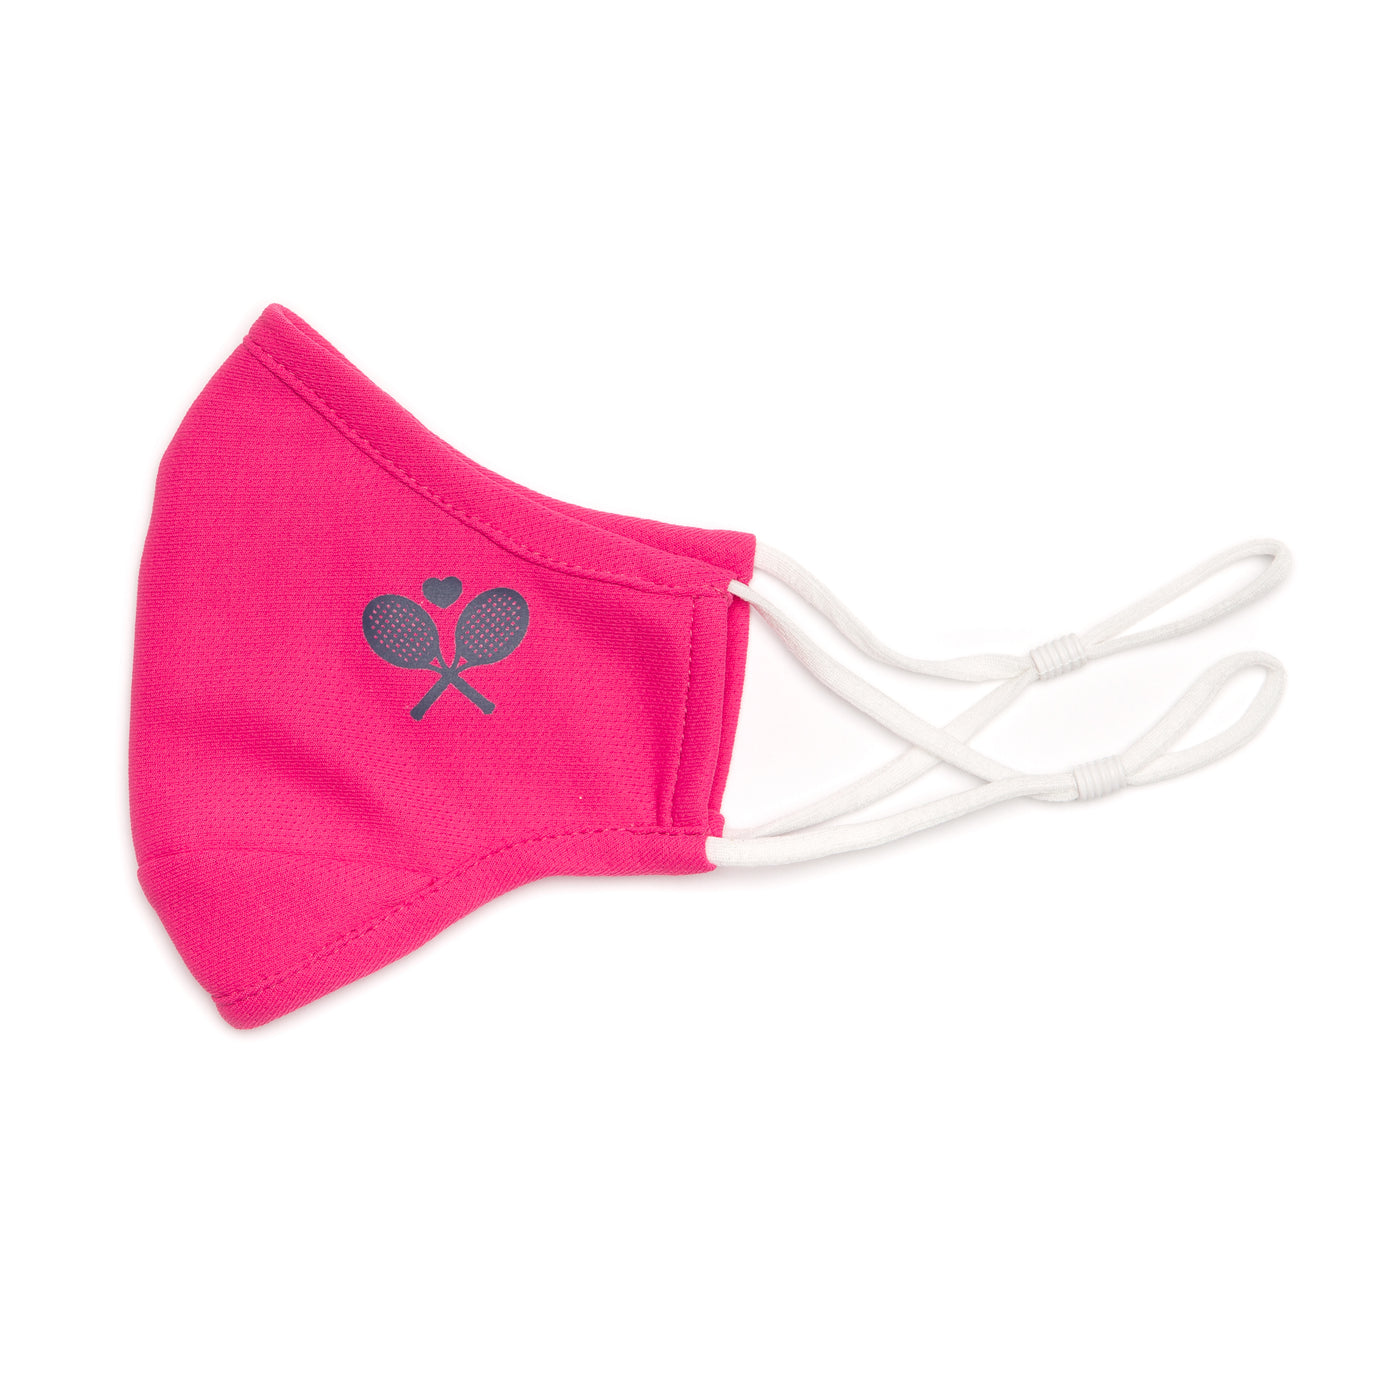 hot pink face mask with navy crossed racquets printed on one side